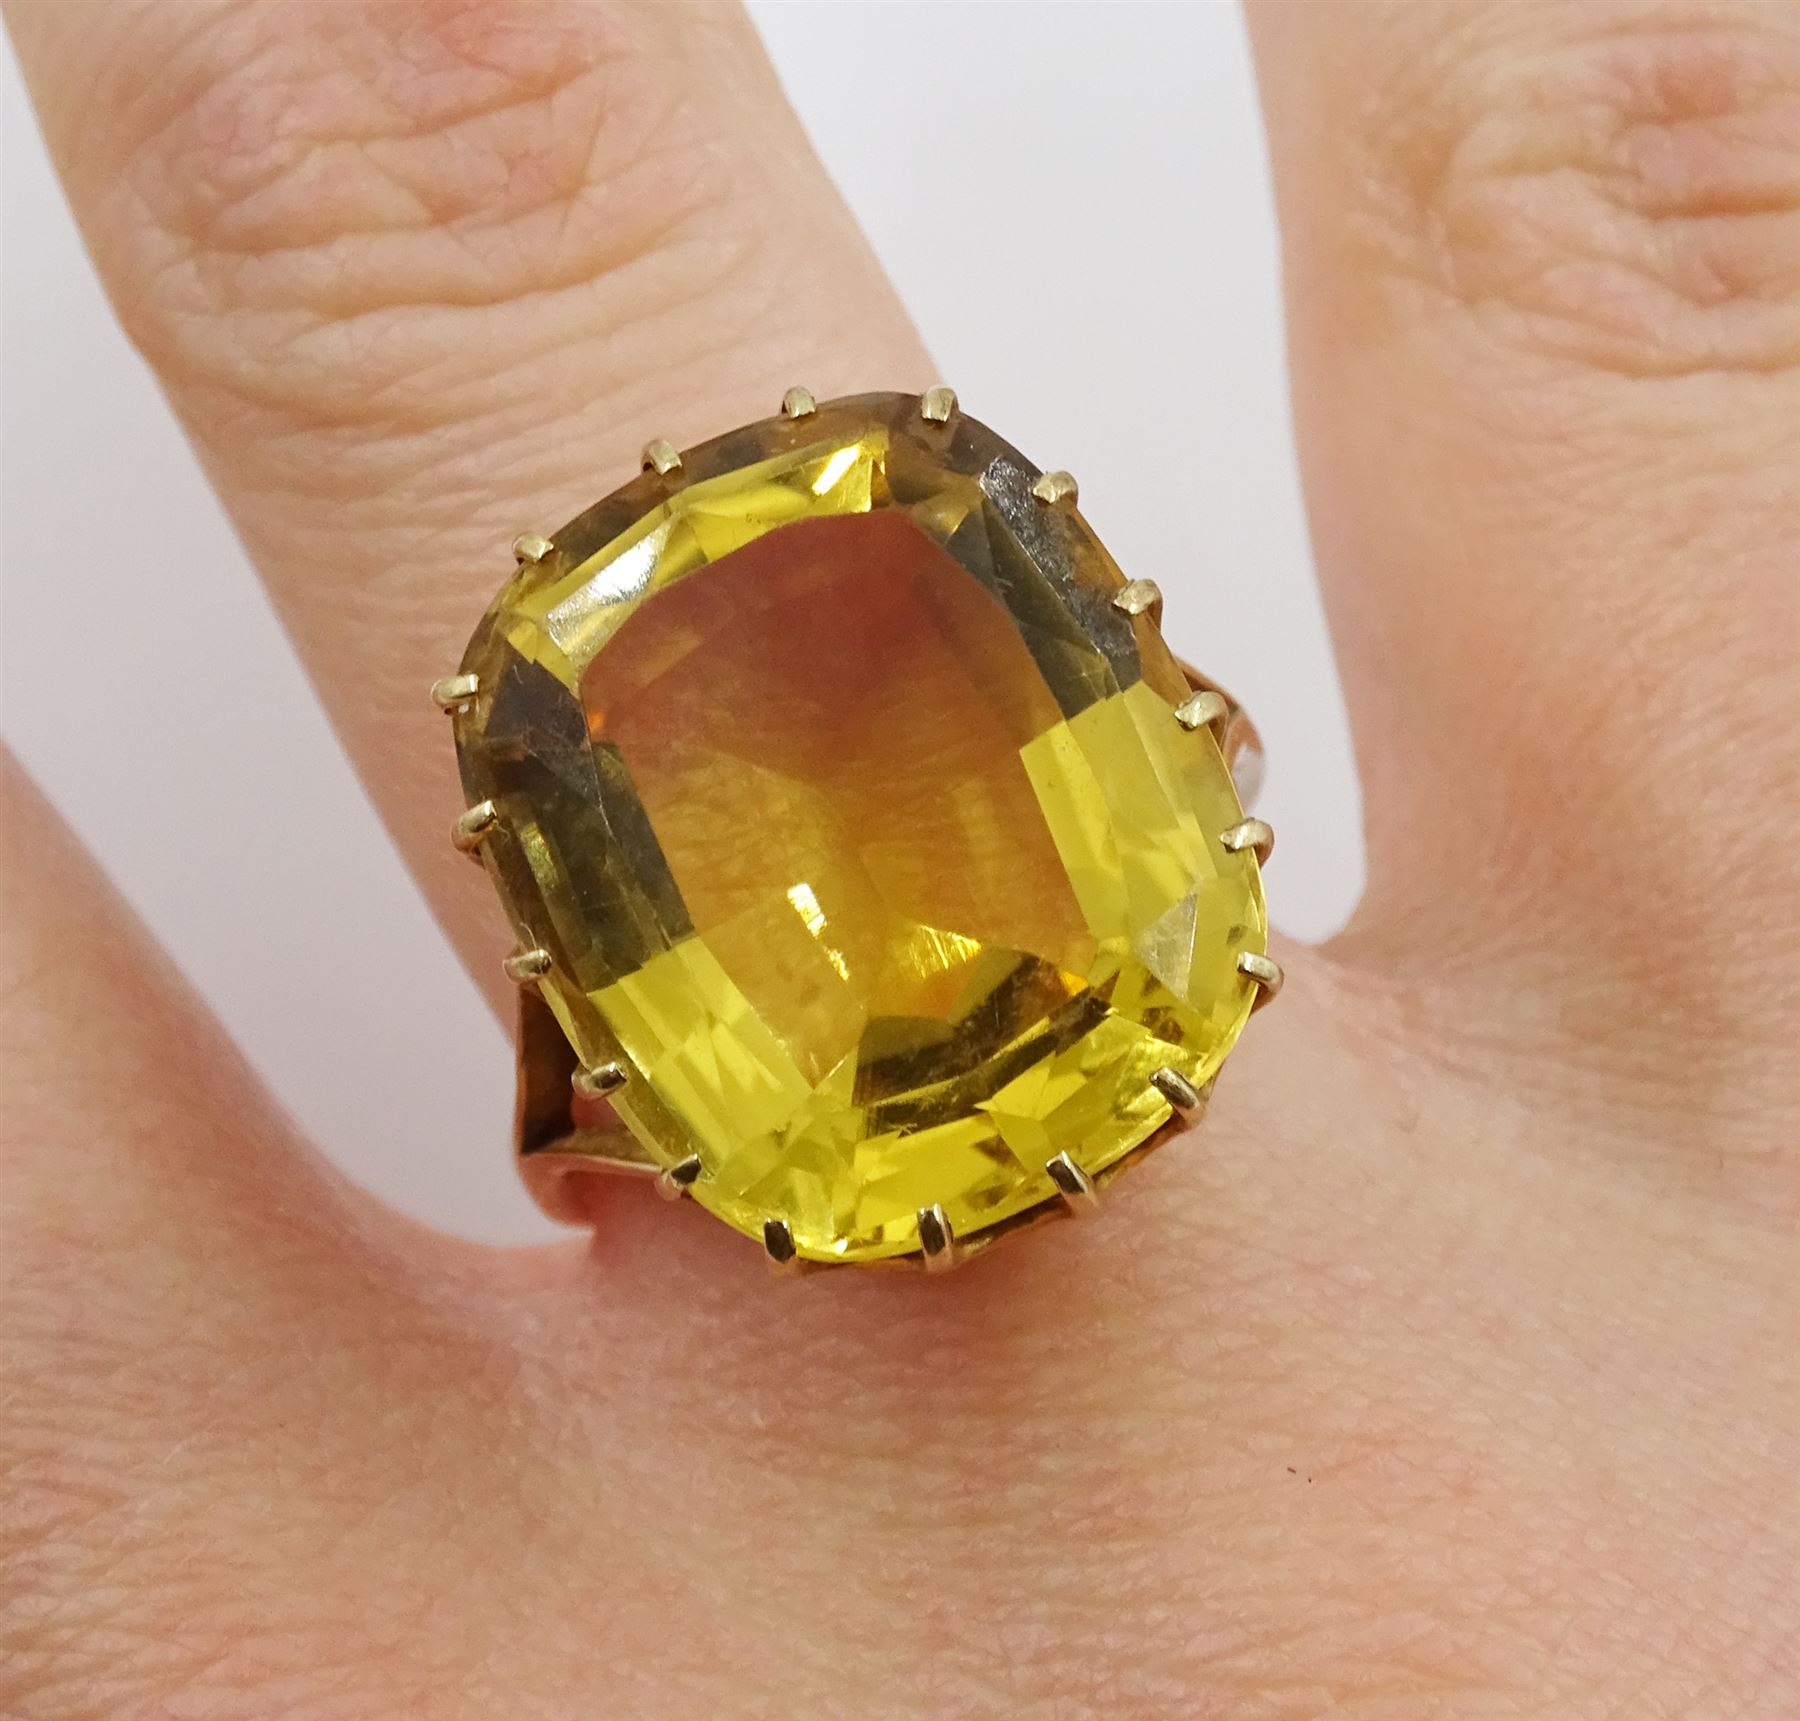 Early-mid 20th century rose gold single stone citrine ring - Image 2 of 4